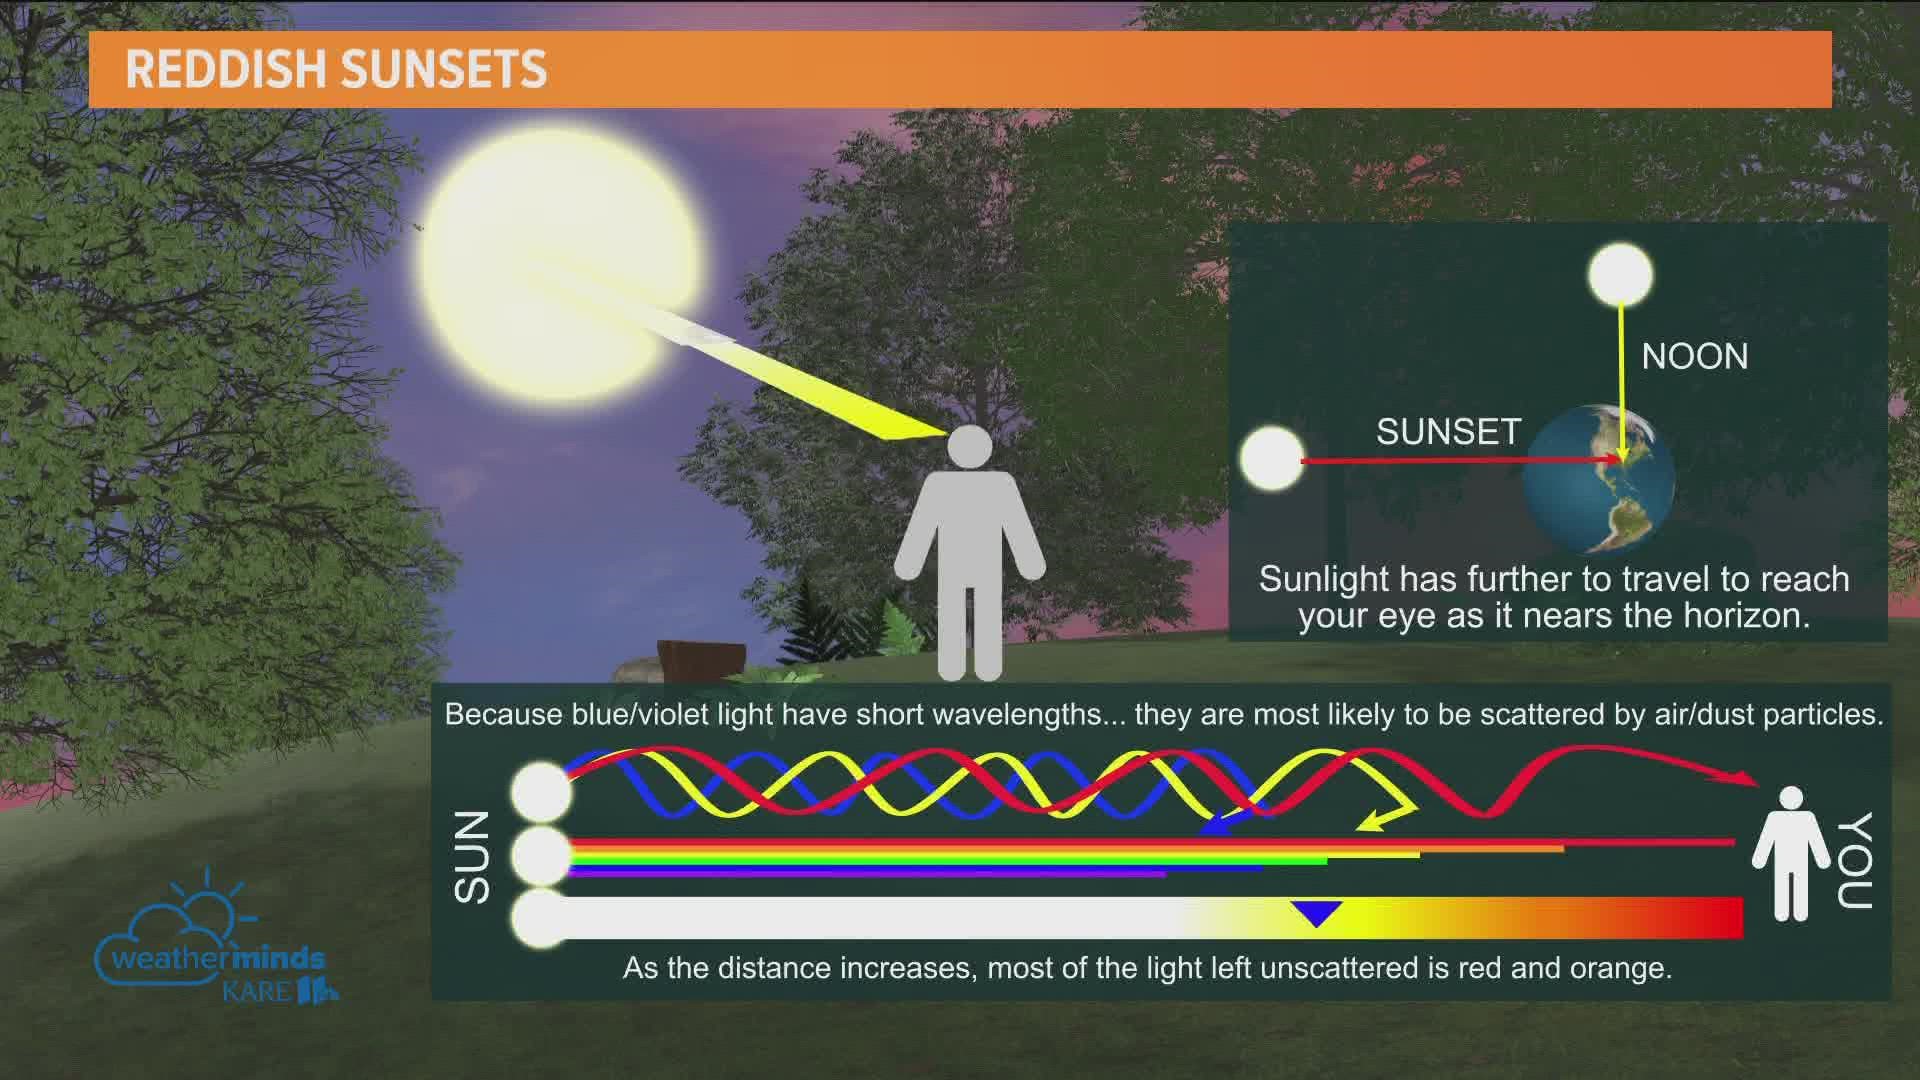 Guy Brown on the science behind the dramatic sunset.